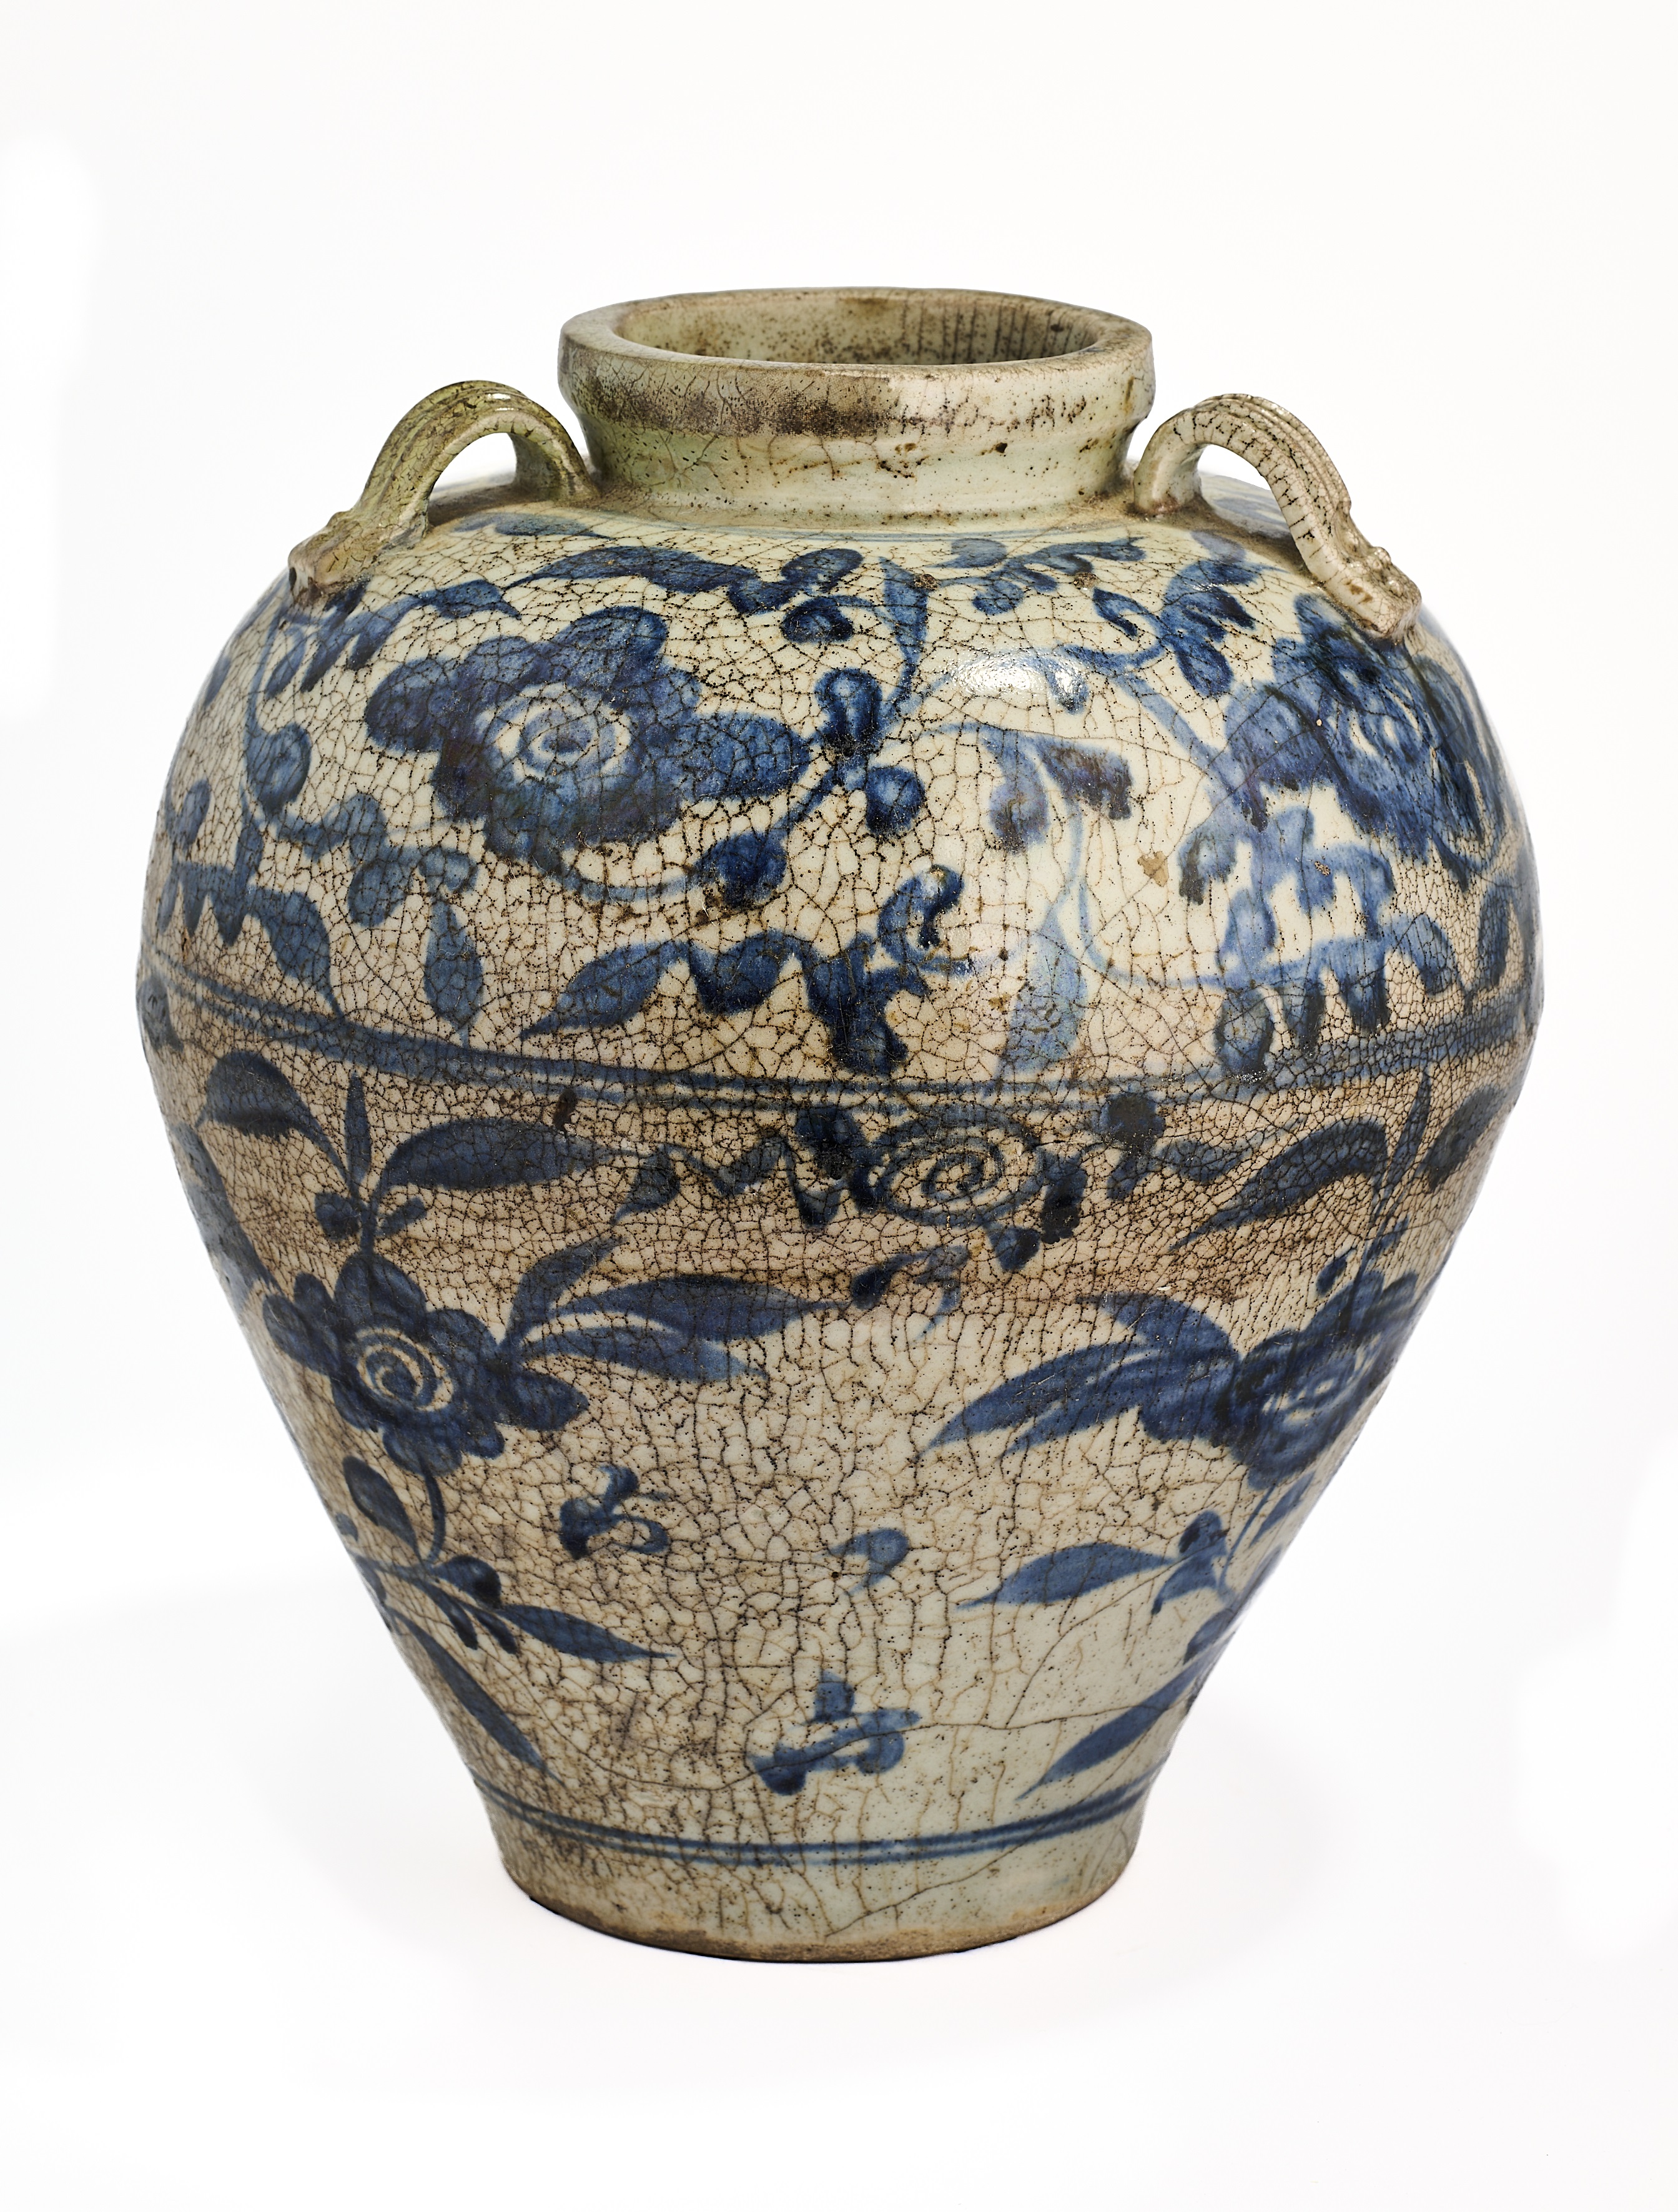 A CHINESE SWATOW BLUE AND WHITE JAR, LATE MING DYNASTY, 16TH CENTURY